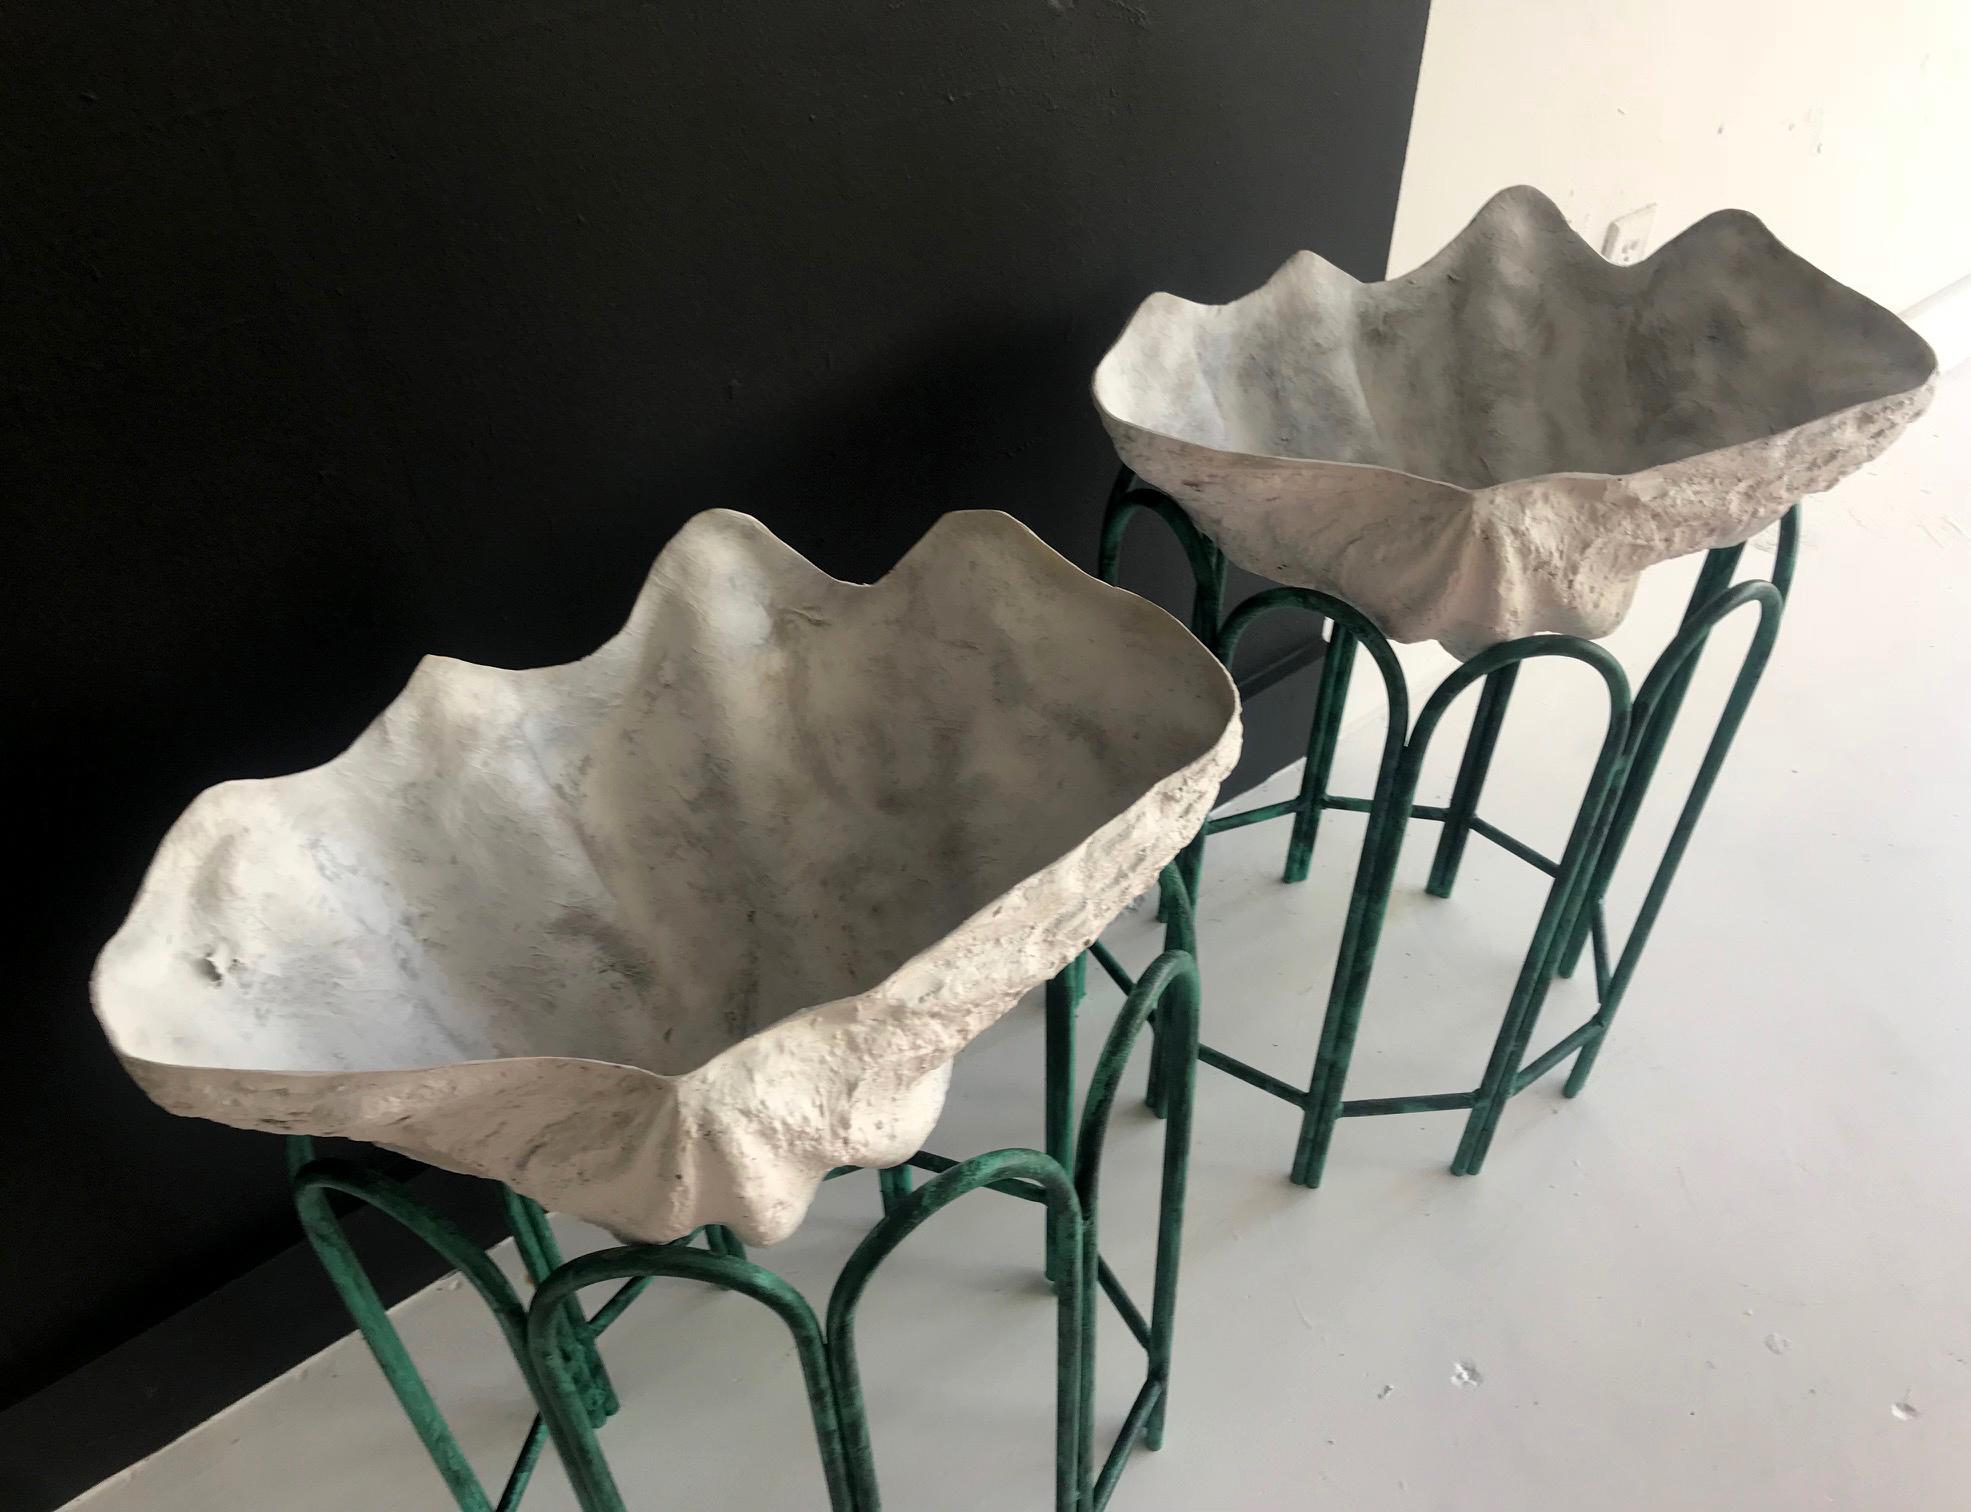 Late 20th Century A Pair of Giant Clam Shell Jardinières or Tables by Tony Duquette